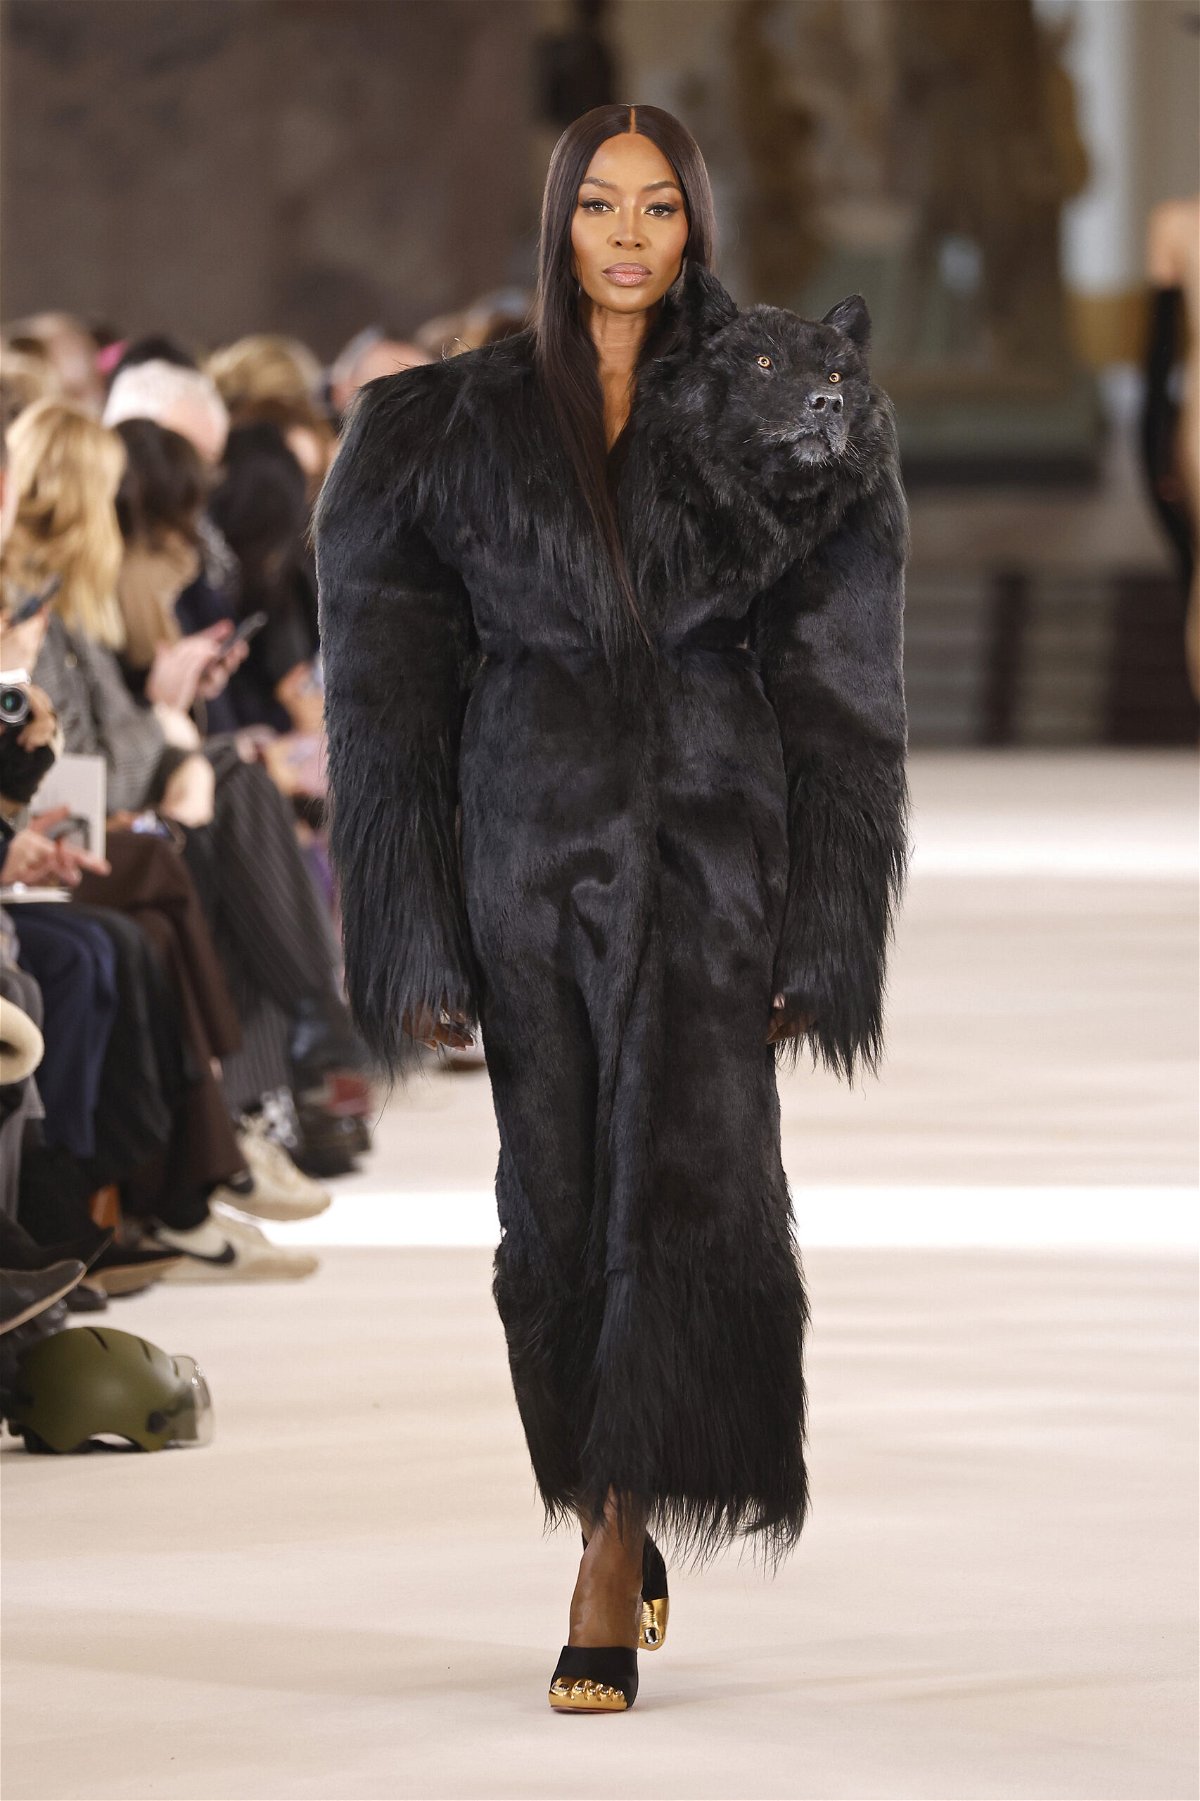 Naomi Campbell walks the runway during the Schiaparelli Haute Couture Spring-Summer 2023.